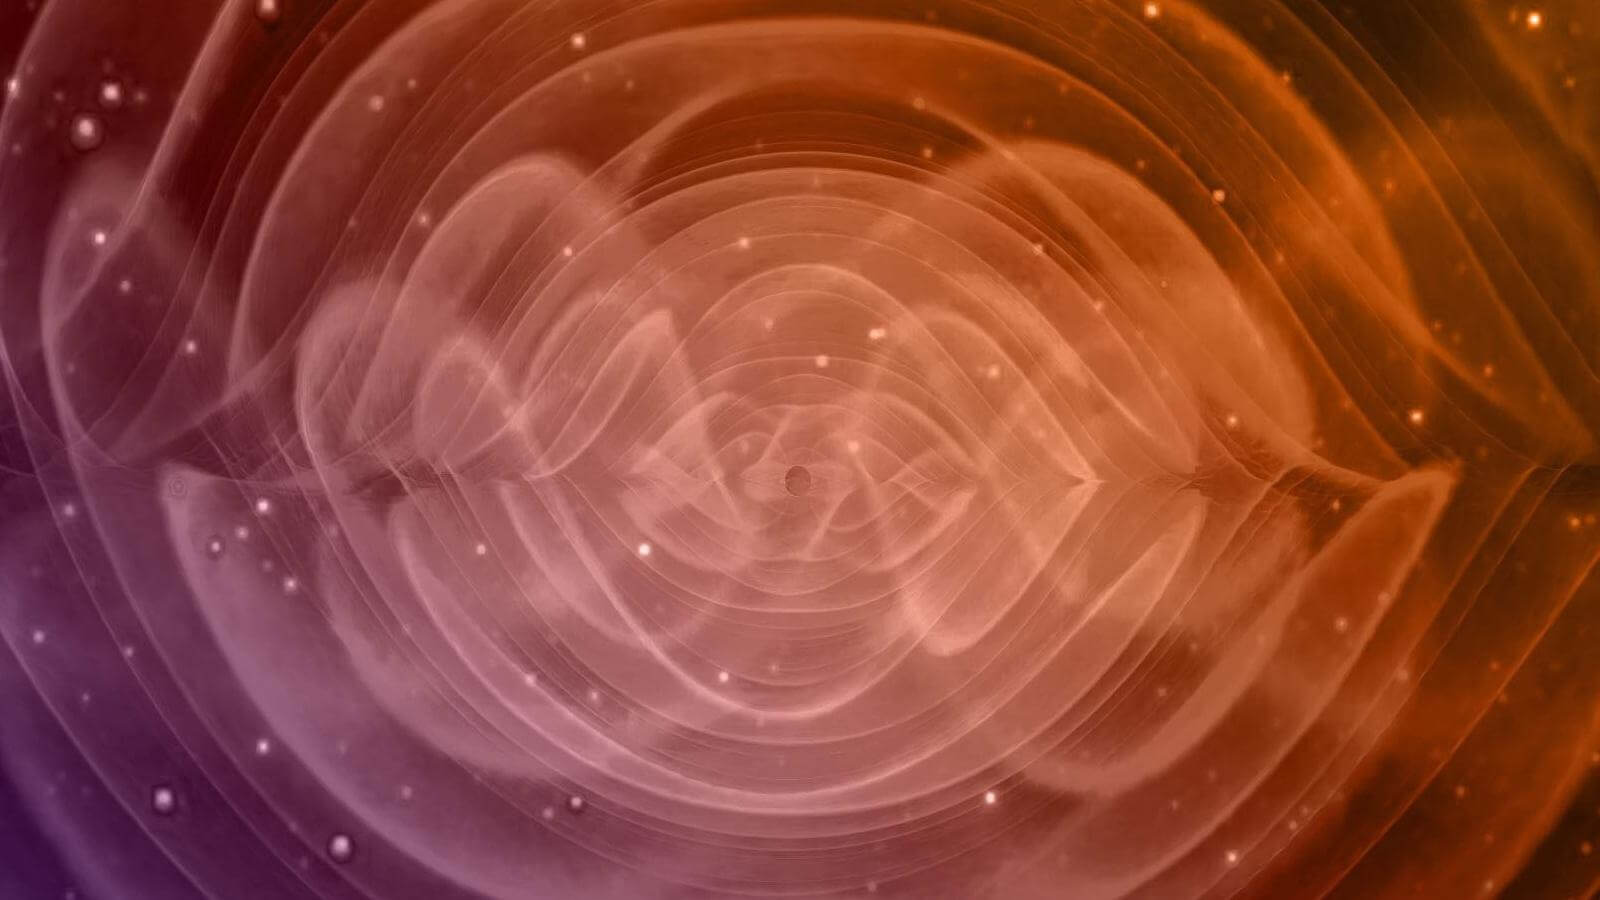 Scientists have discovered an unknown source of gravitational waves